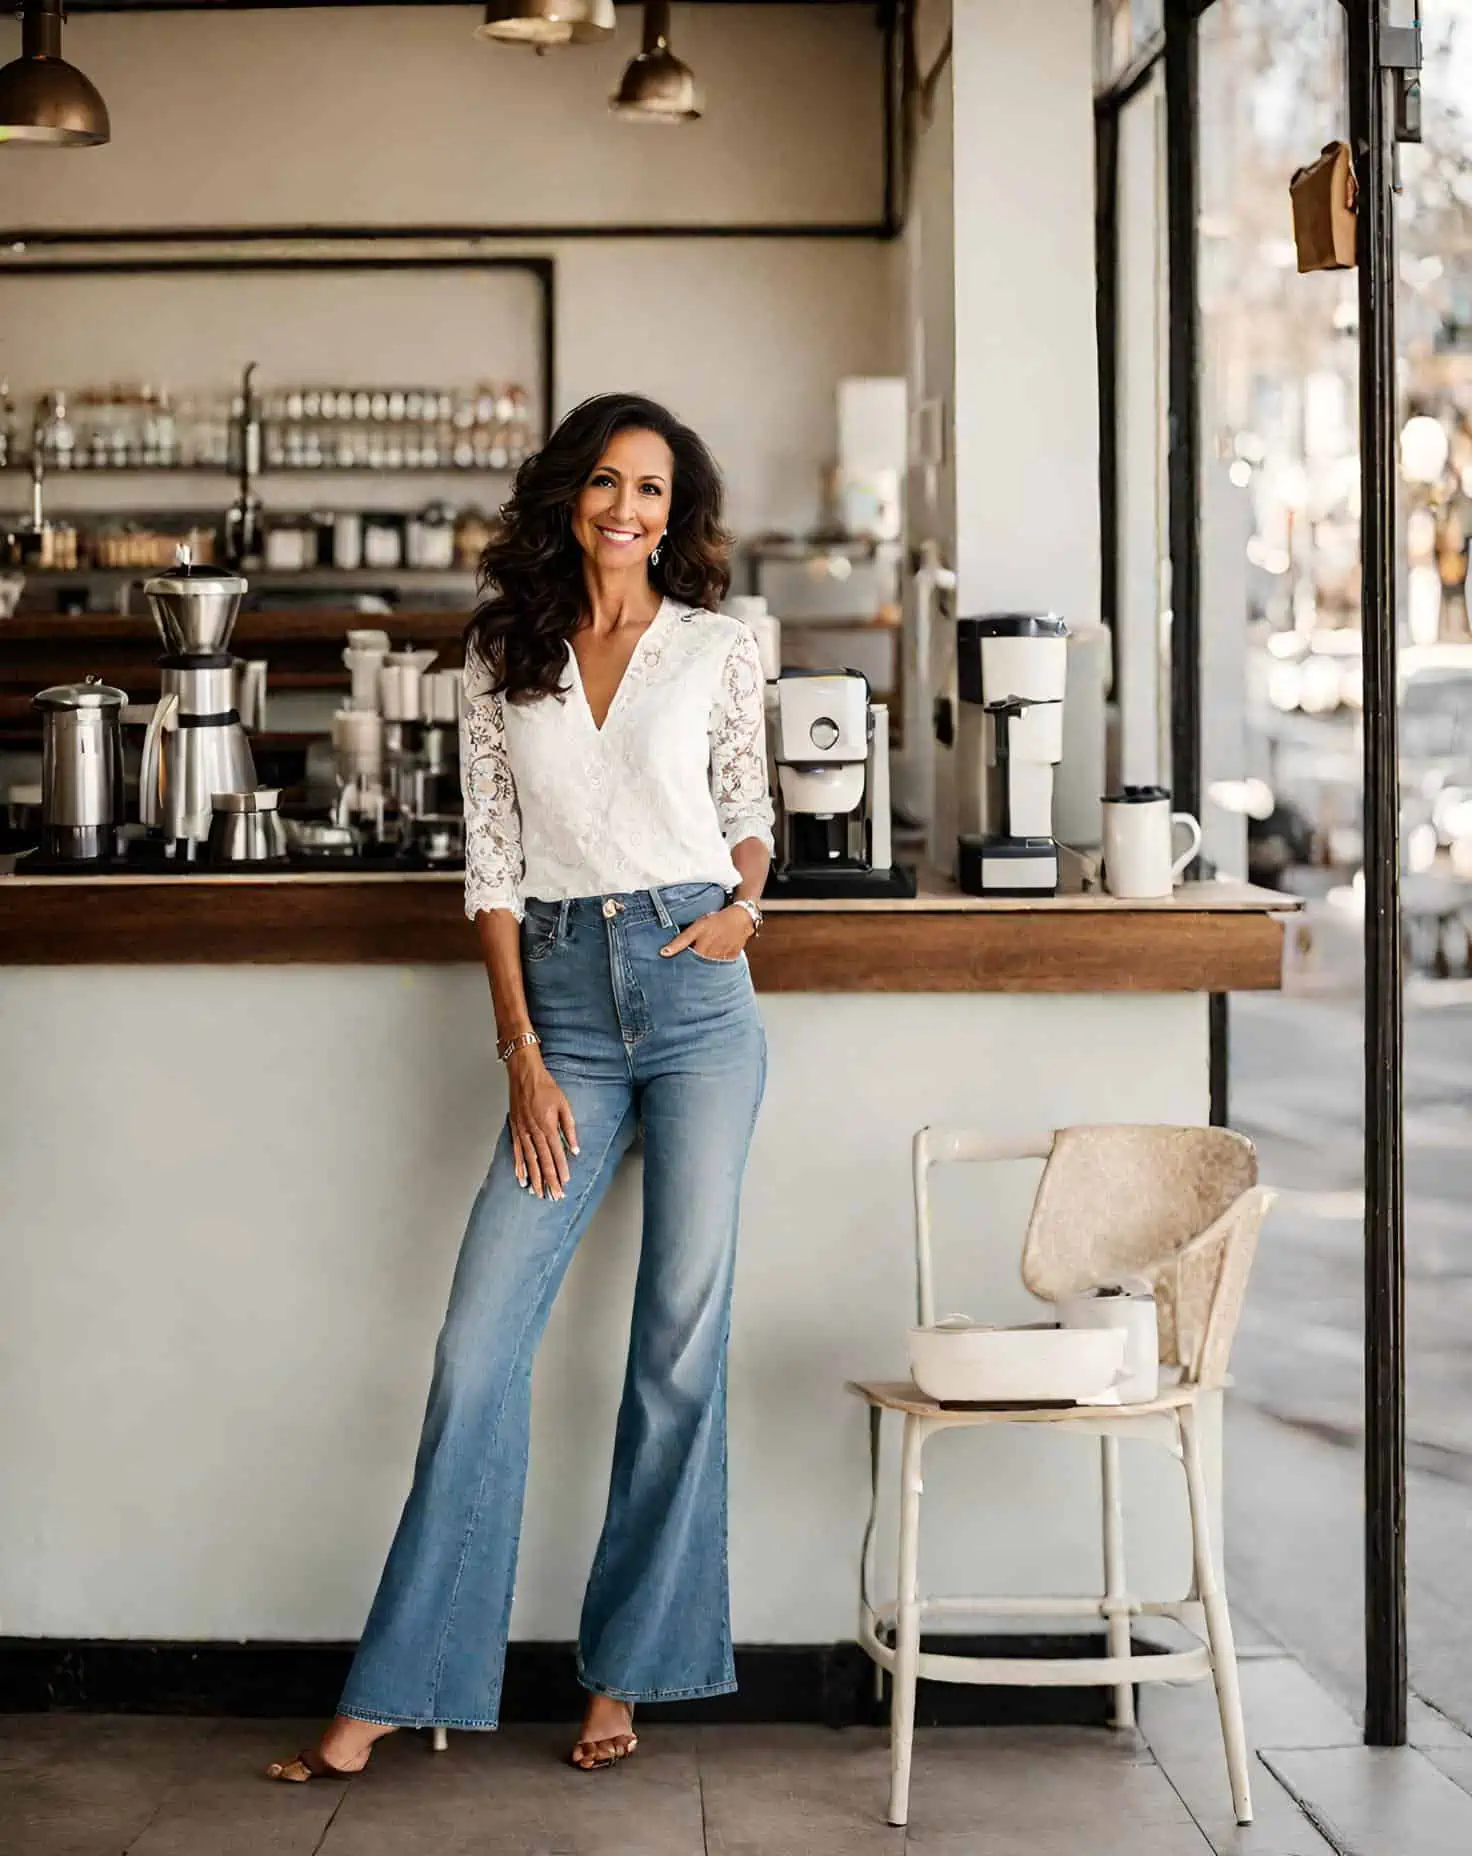 Wearing Wide-Leg Jeans When You're Over 50 - 50 IS NOT OLD - A